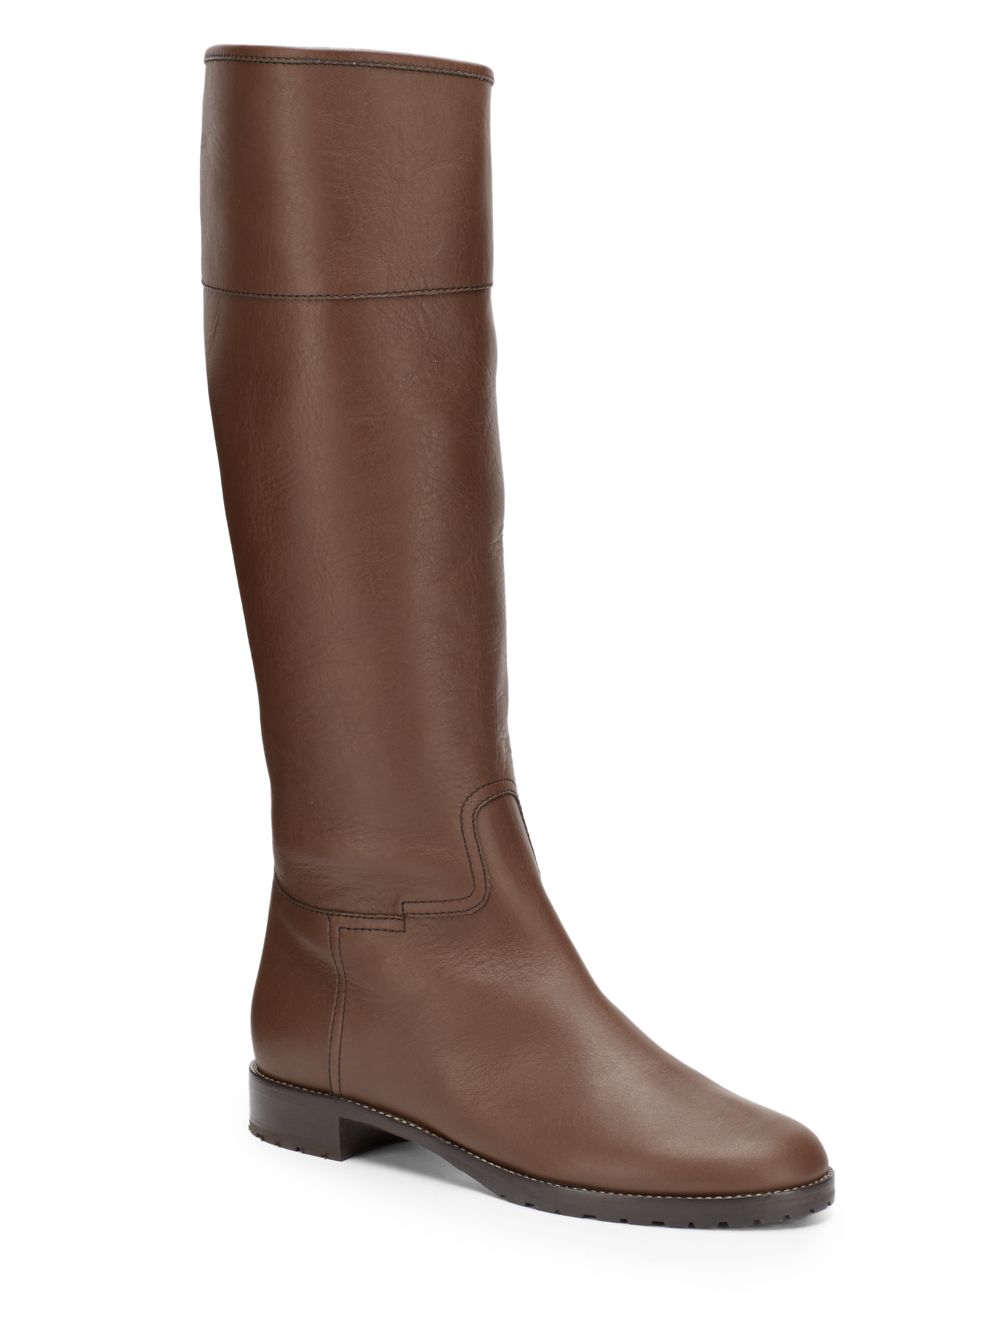 Lyst - Giuseppe zanotti Flat Leather Riding Boots in Brown